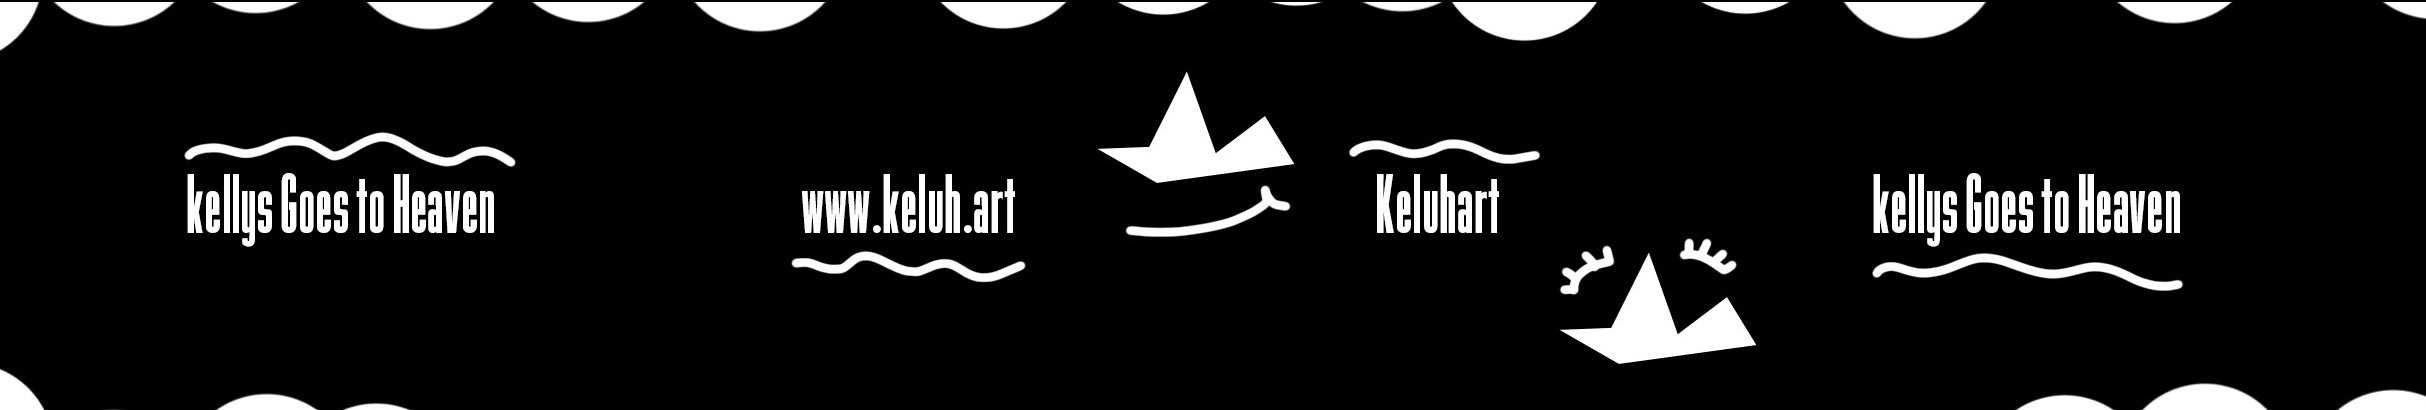 Kellys Goes to Heaven's profile banner